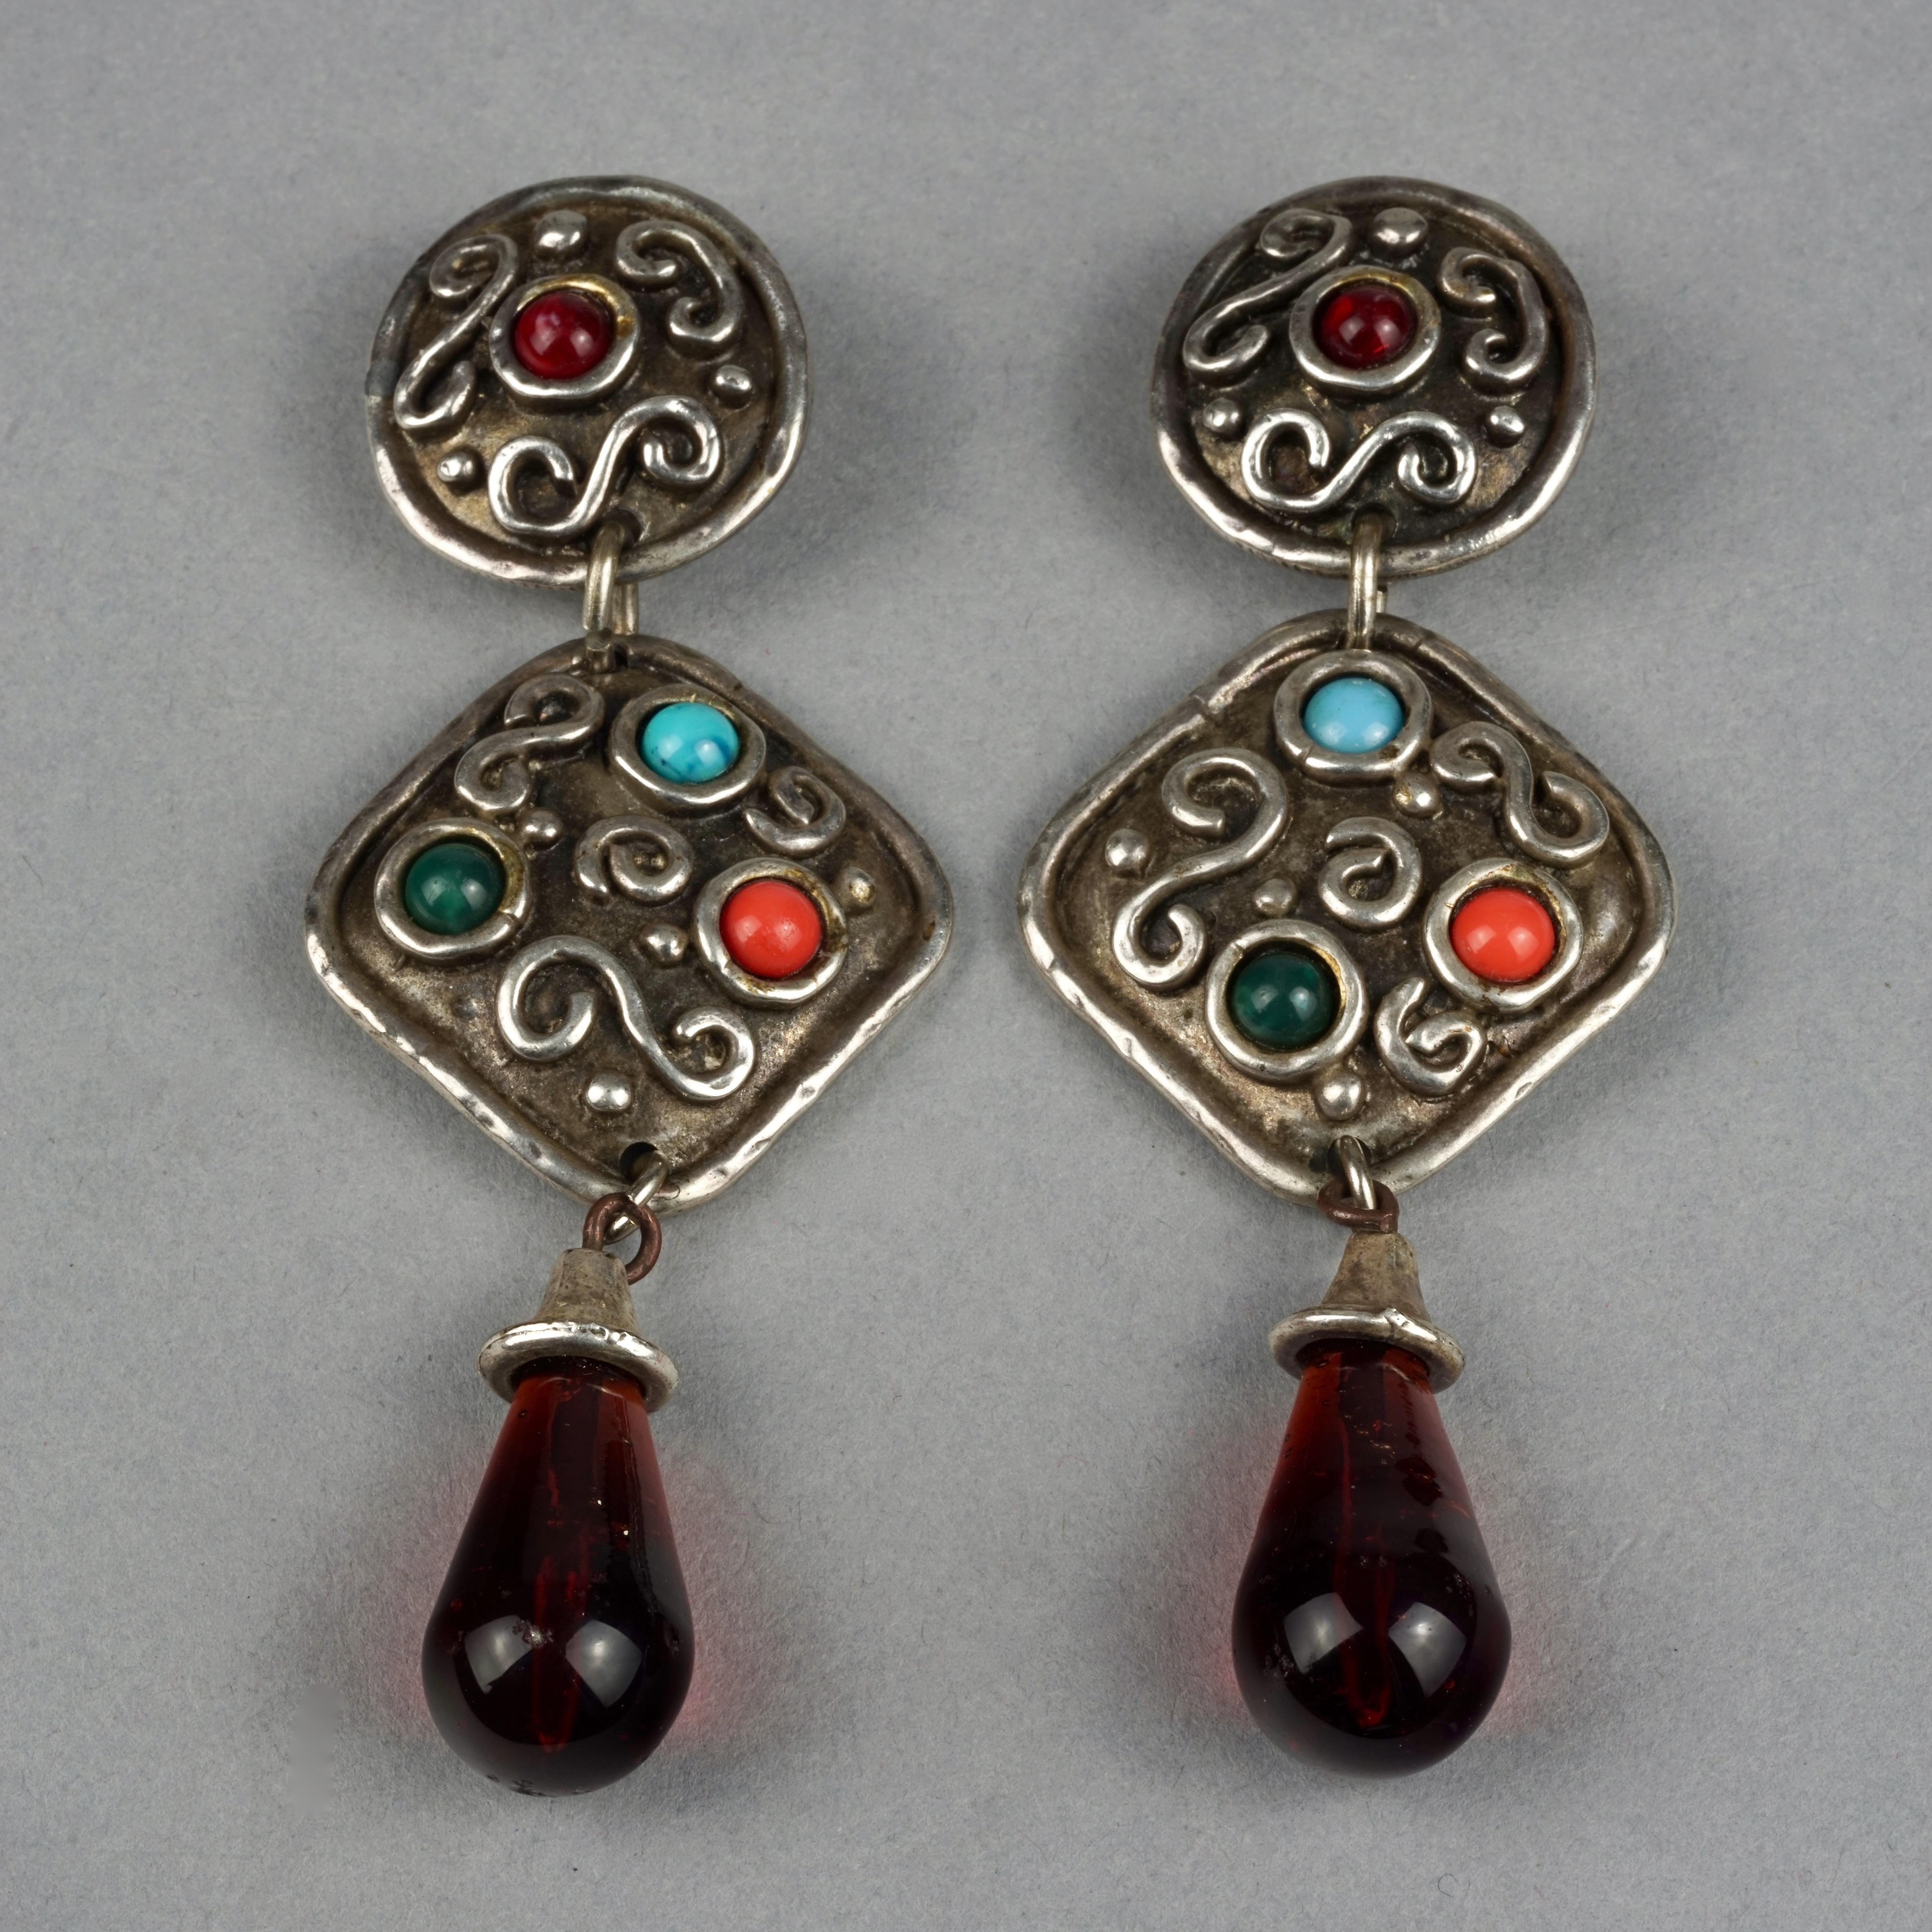 Vintage EDOUARD RAMBAUD Geometric Ethnic Dangling Earrings In Good Condition For Sale In Kingersheim, Alsace